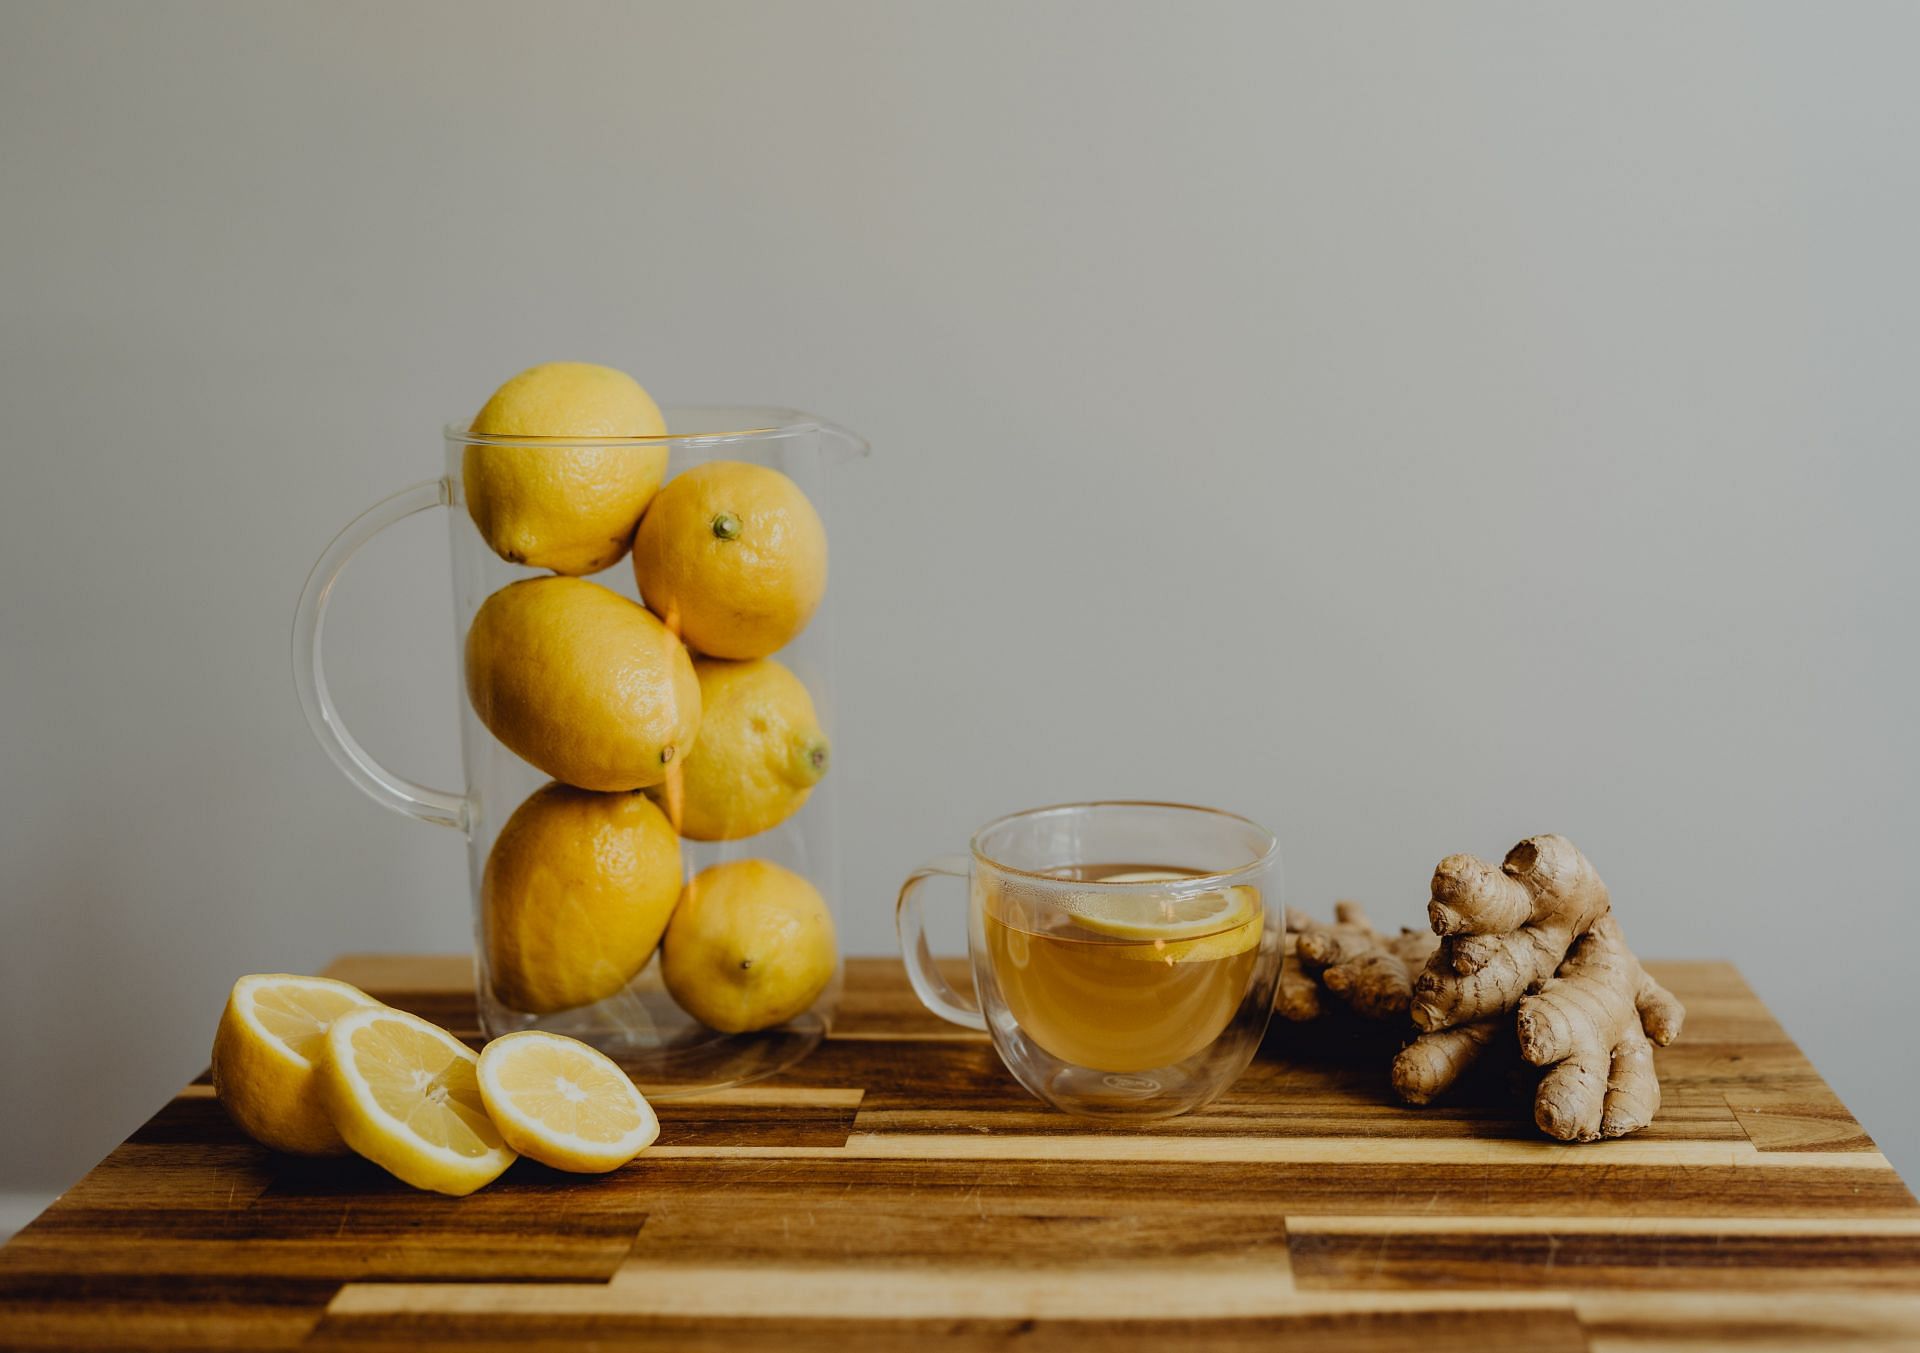 Ginger in waters - Why it is a great help? (Image via Unsplash/ Kelly Sikkema)